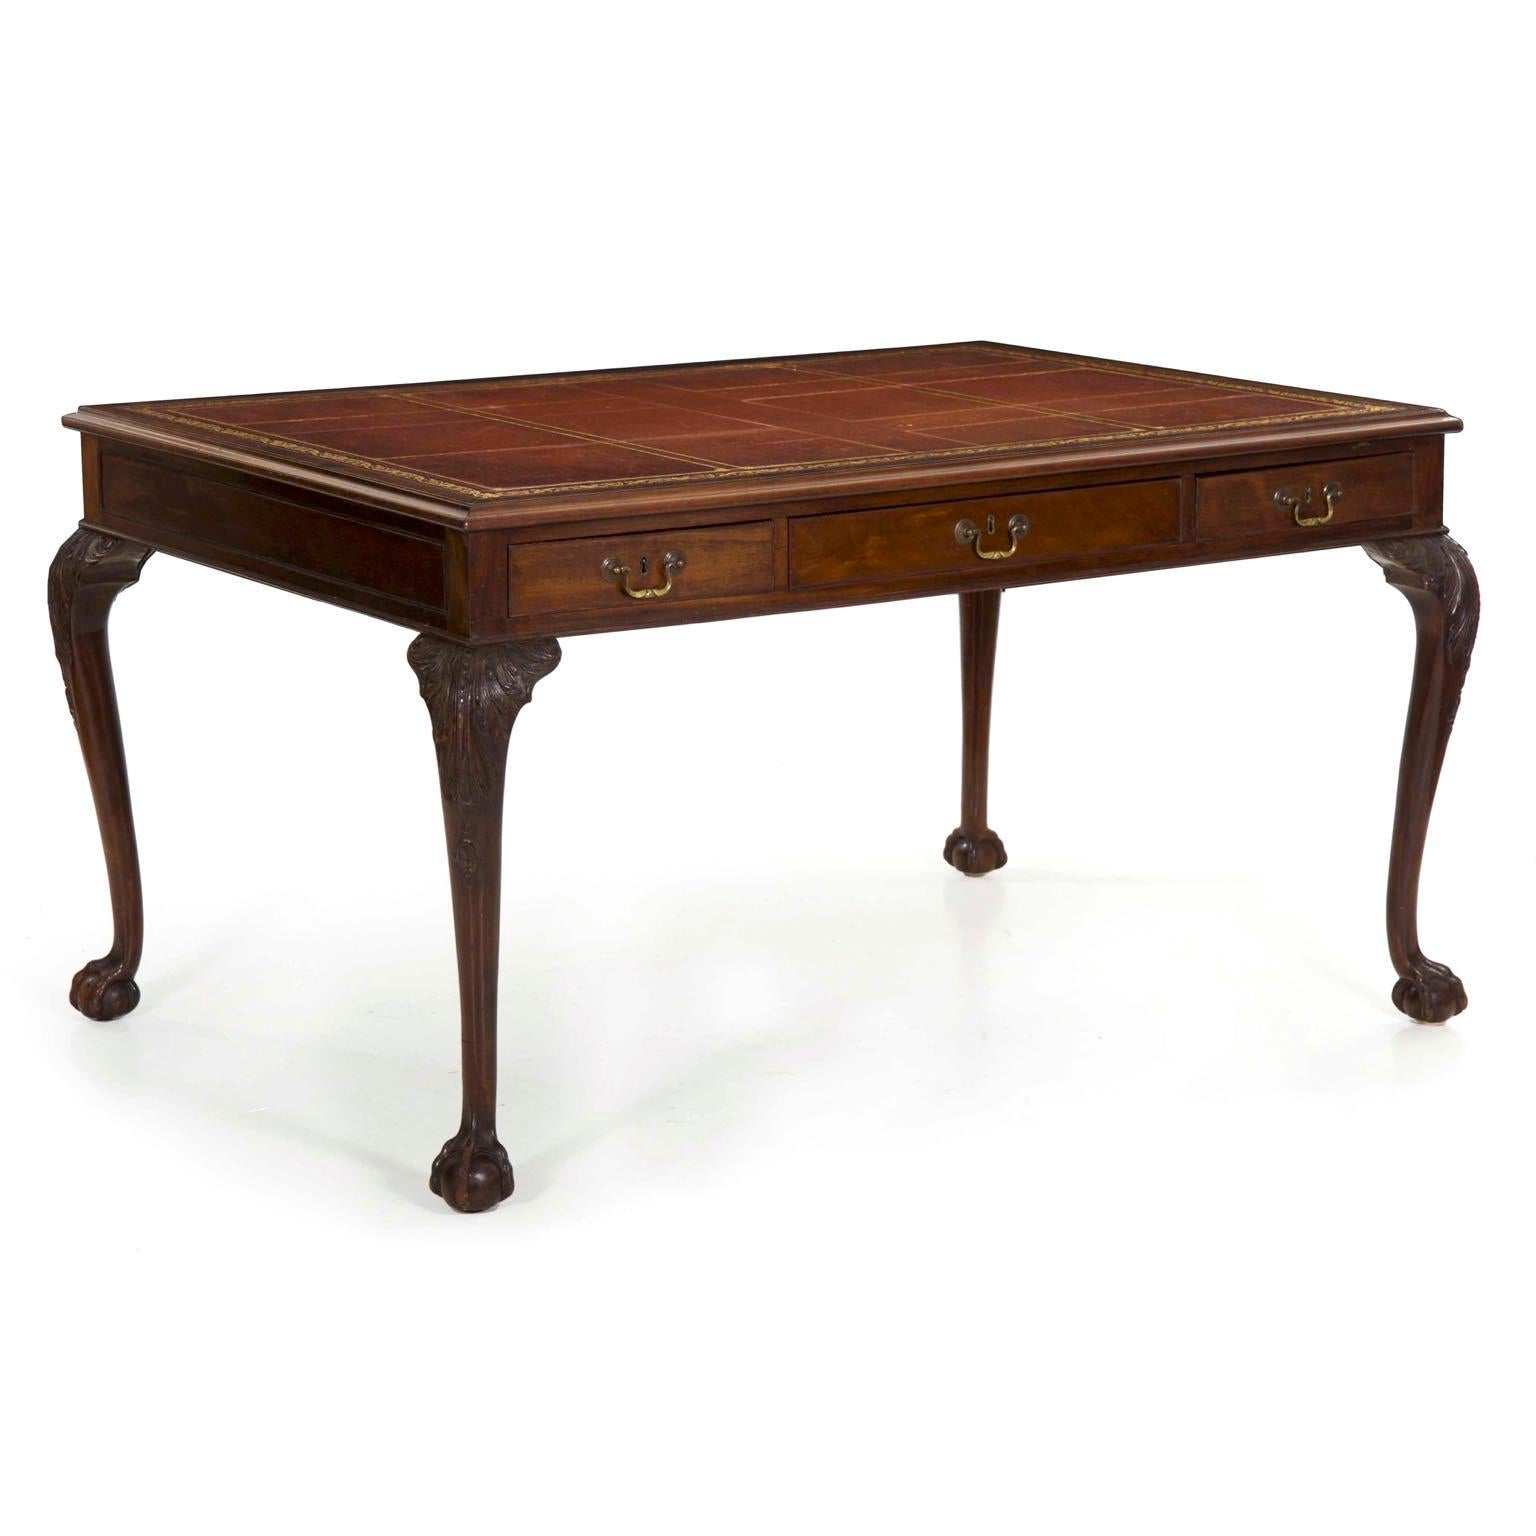 This is a very striking library table that is intended to be placed in a large study or library room where to people can work opposite one another. Both sides feature three drawers, one broad central drawer flanked by two more narrow drawers, each